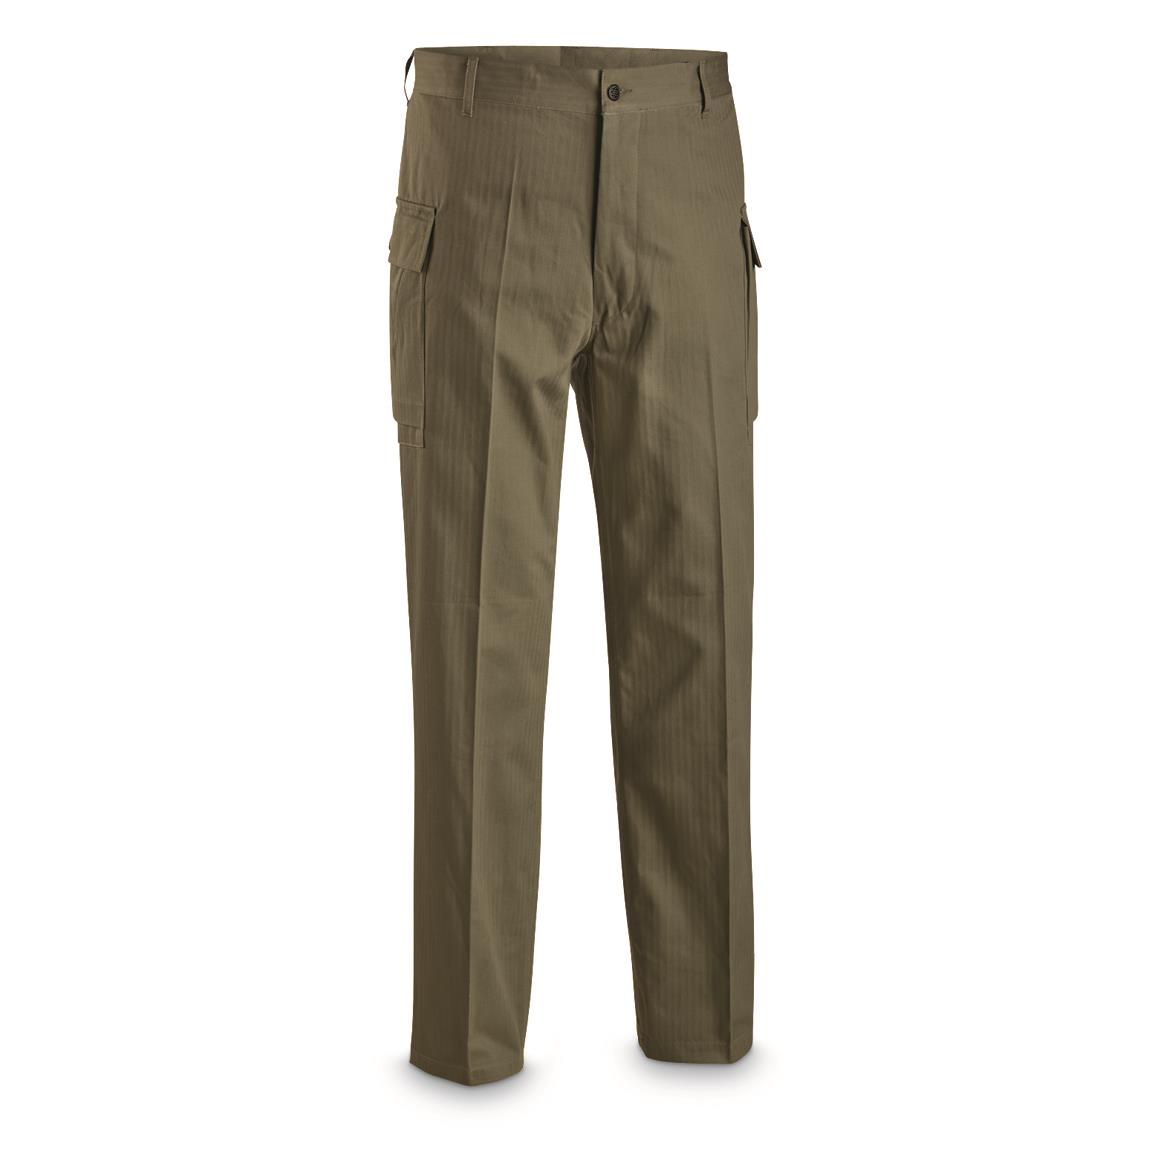 U.S. Military WWII HBT Pants, Reproduction - 75920, Reproduction ...